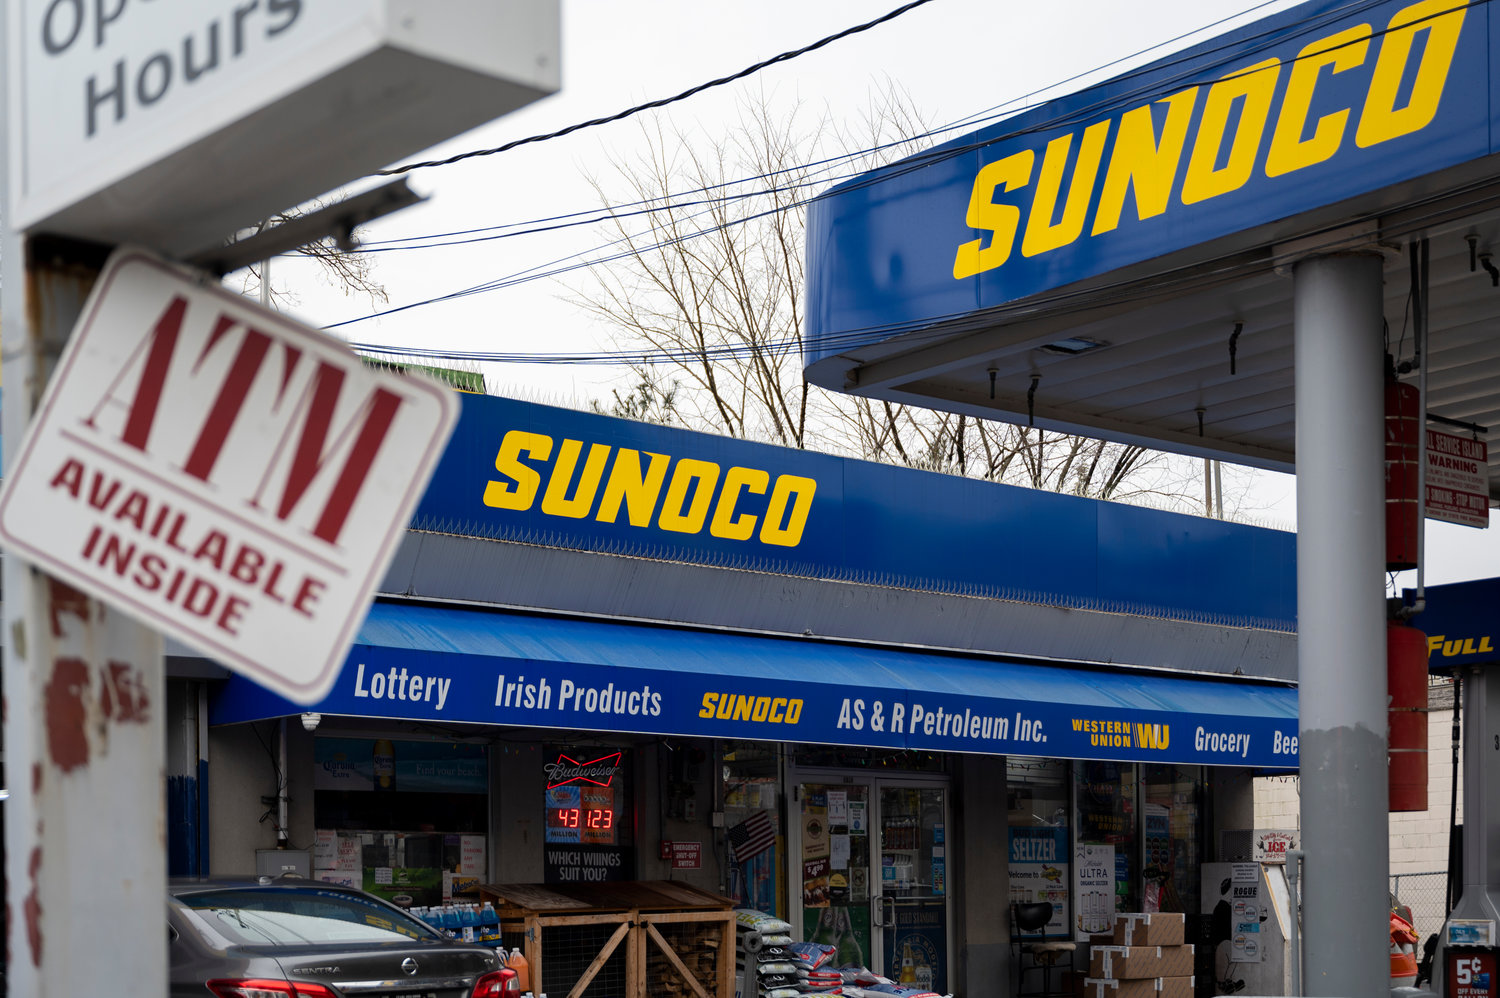 The exterior of Sunoco gas station along Riverdale Ave.